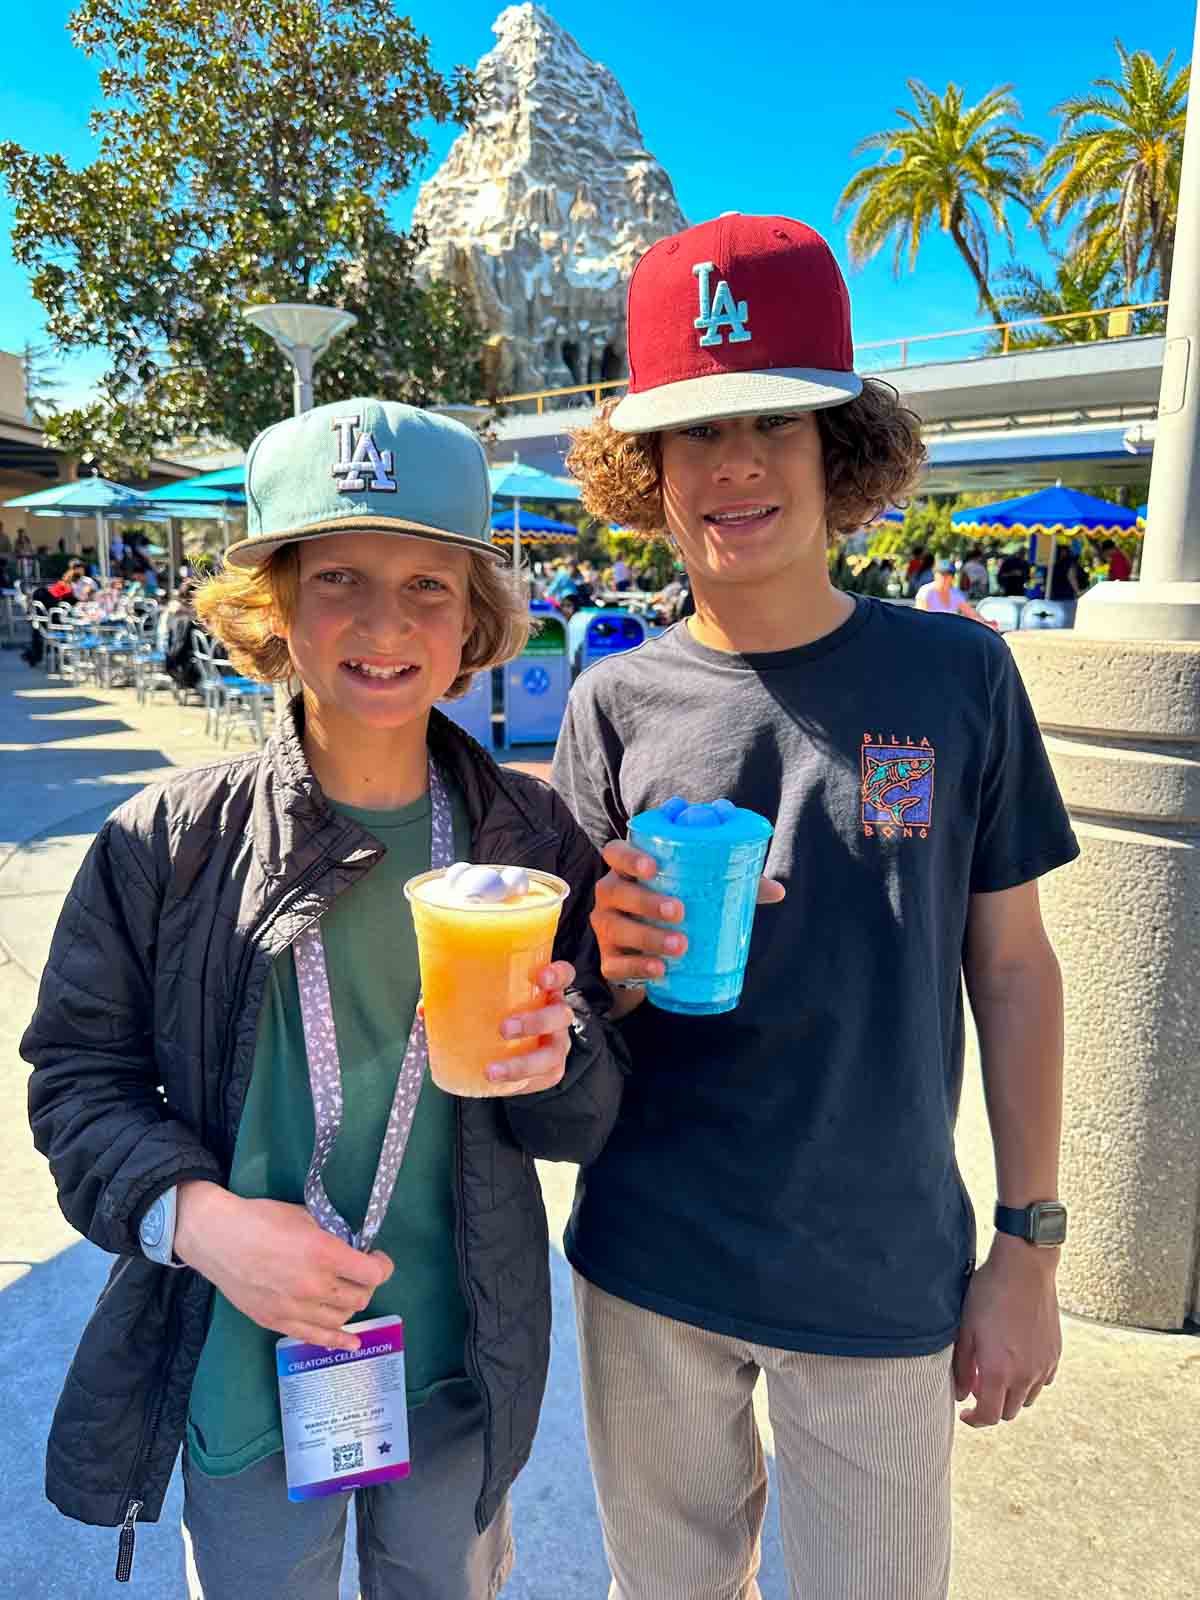 Two boys in hats holding yellow and blue frosties in plastic cups outside.